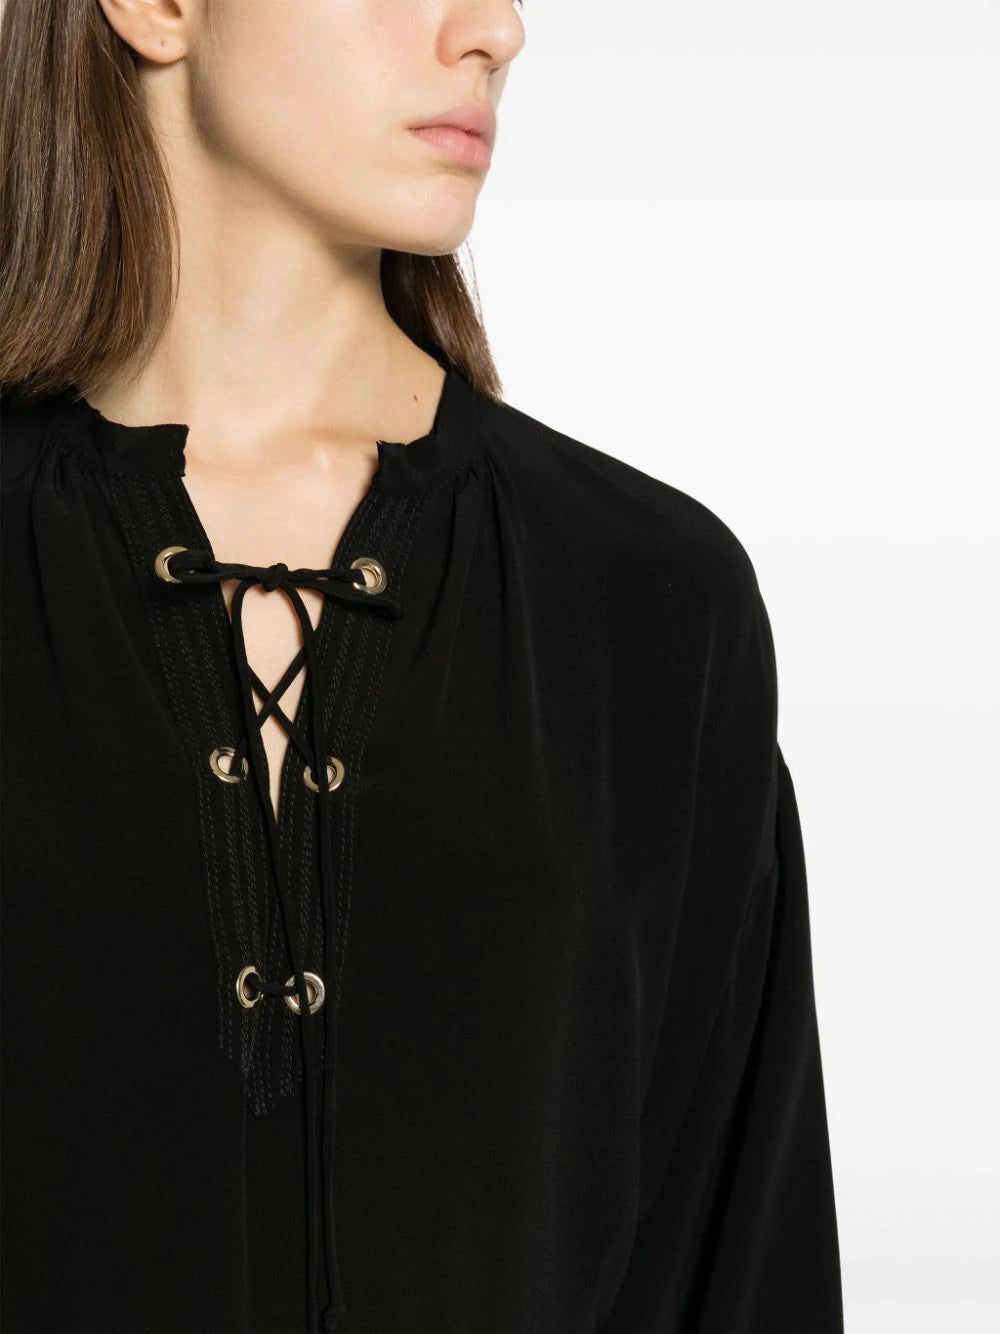 SOPHISTICATED VOLUMES blouse, pure black